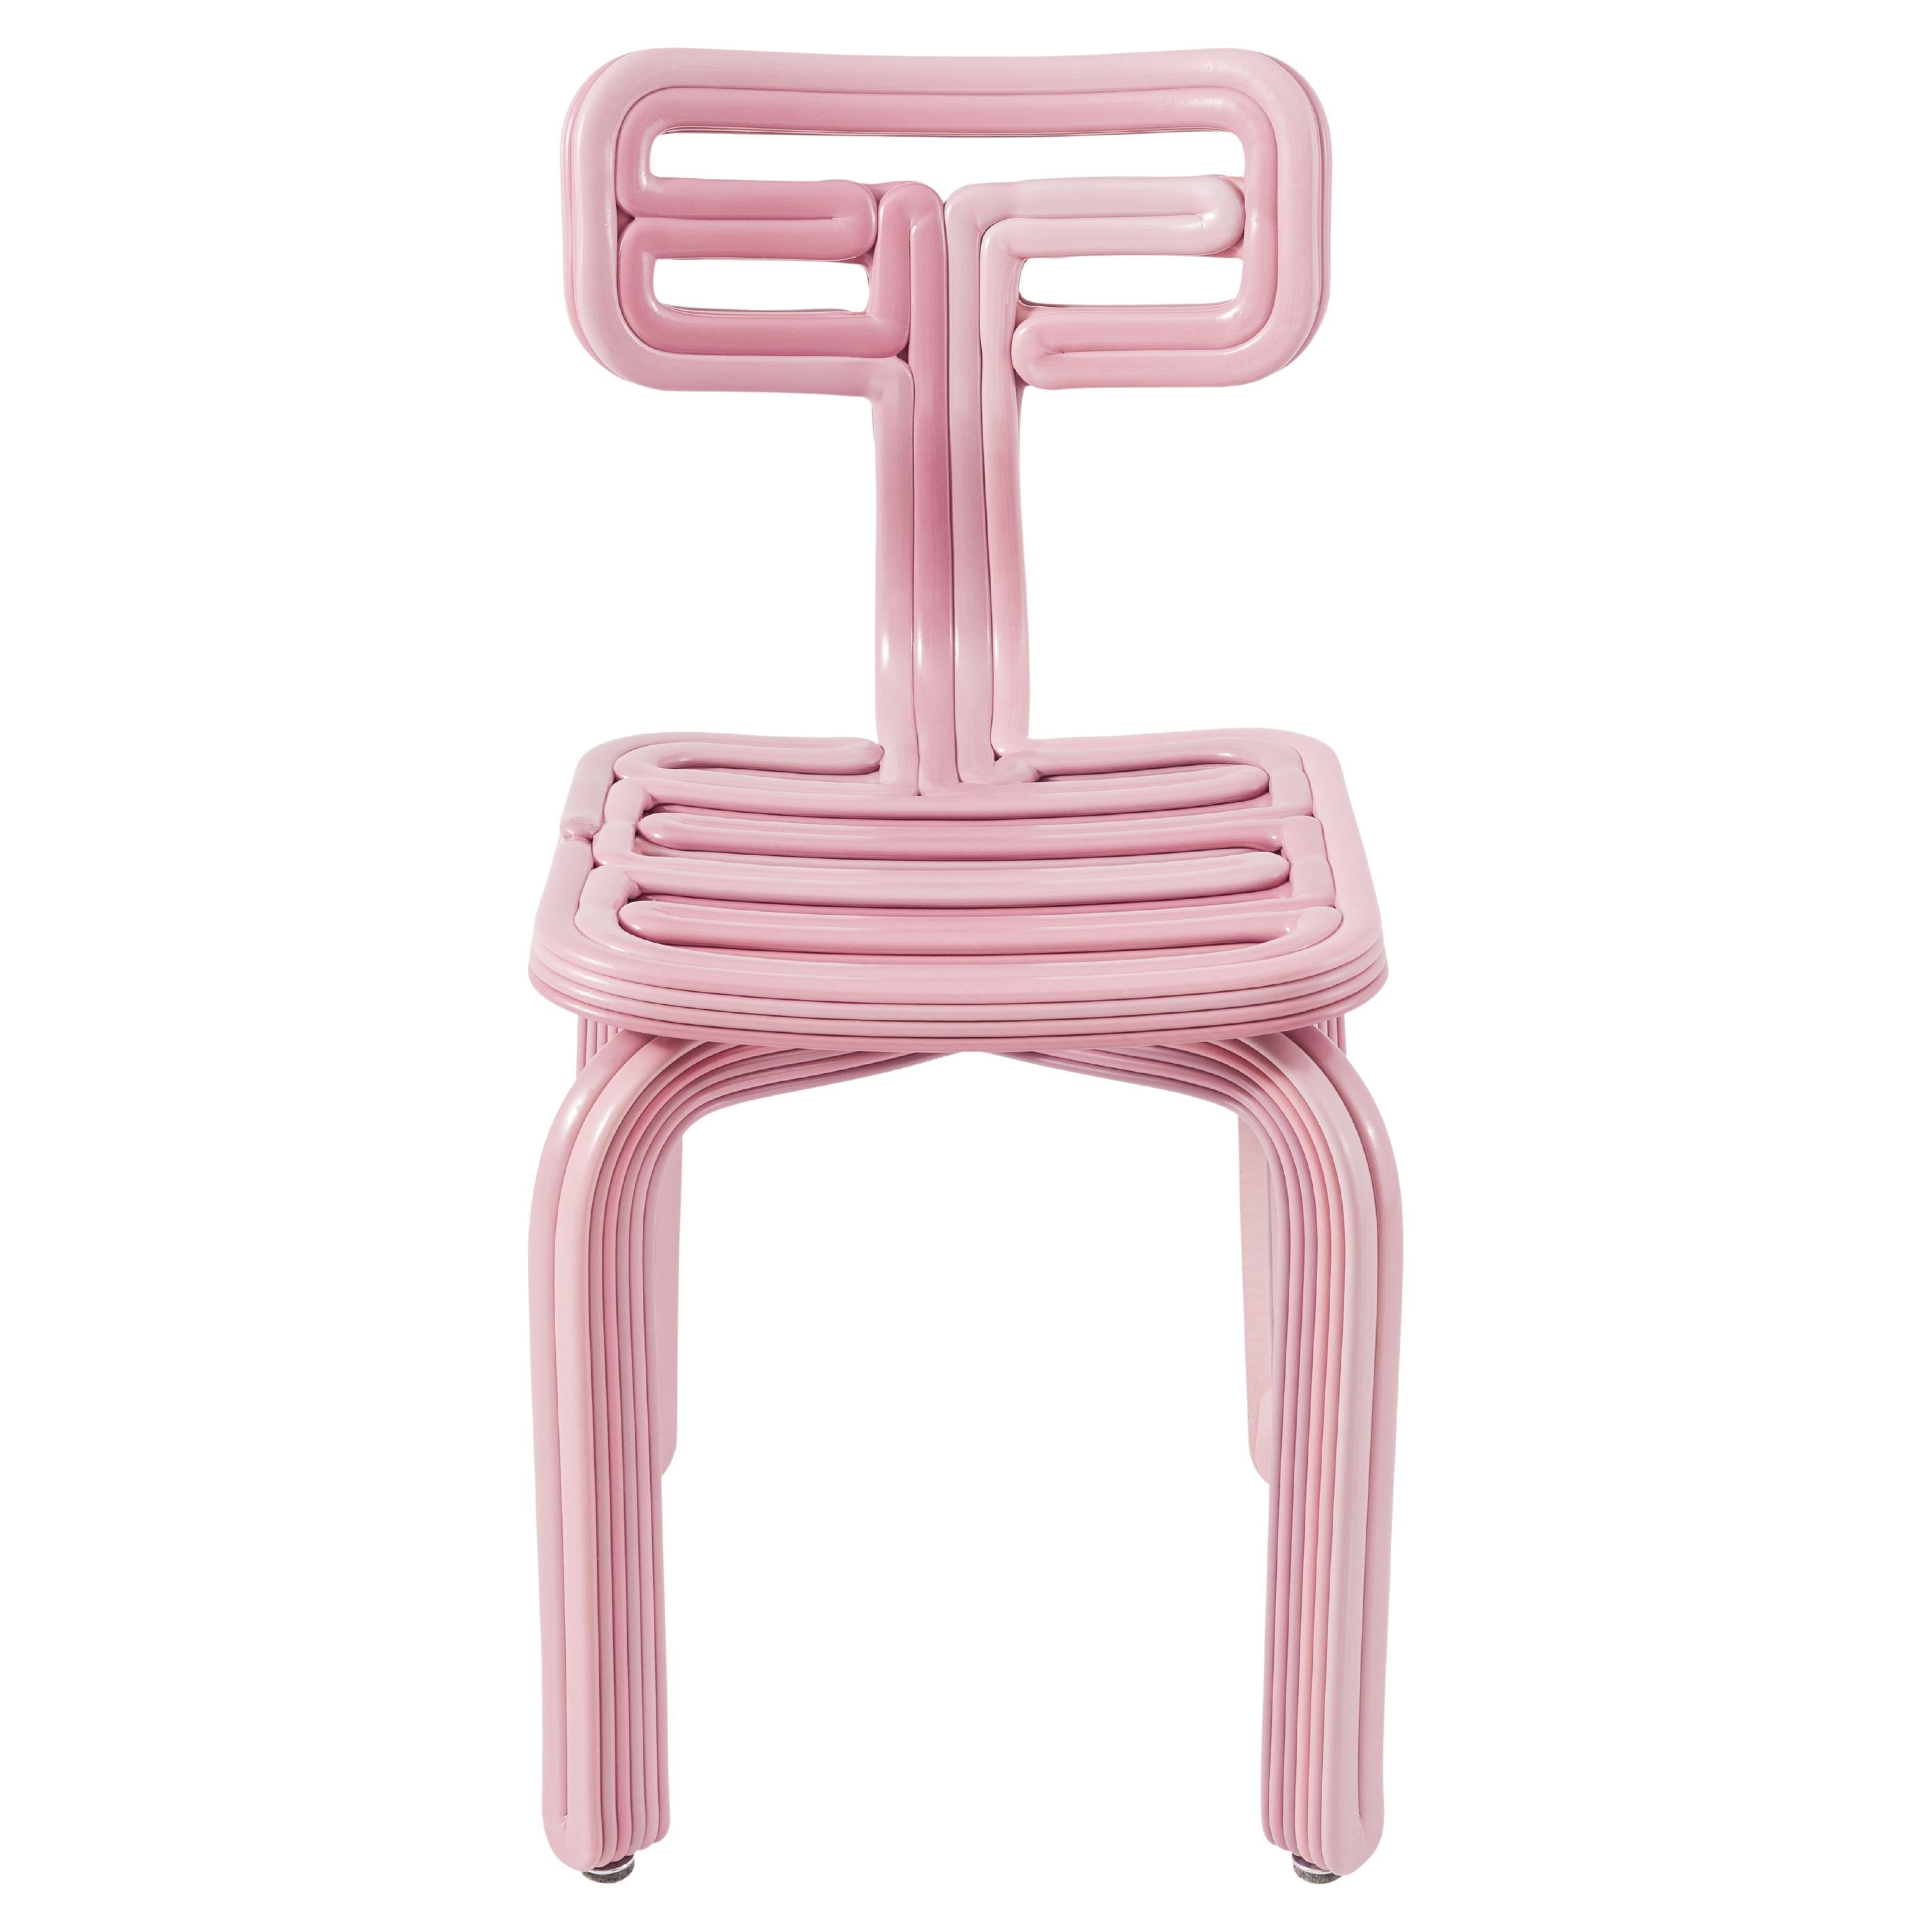 Chubby Chair in Eraser 3D Printed Recycled Plastic For Sale